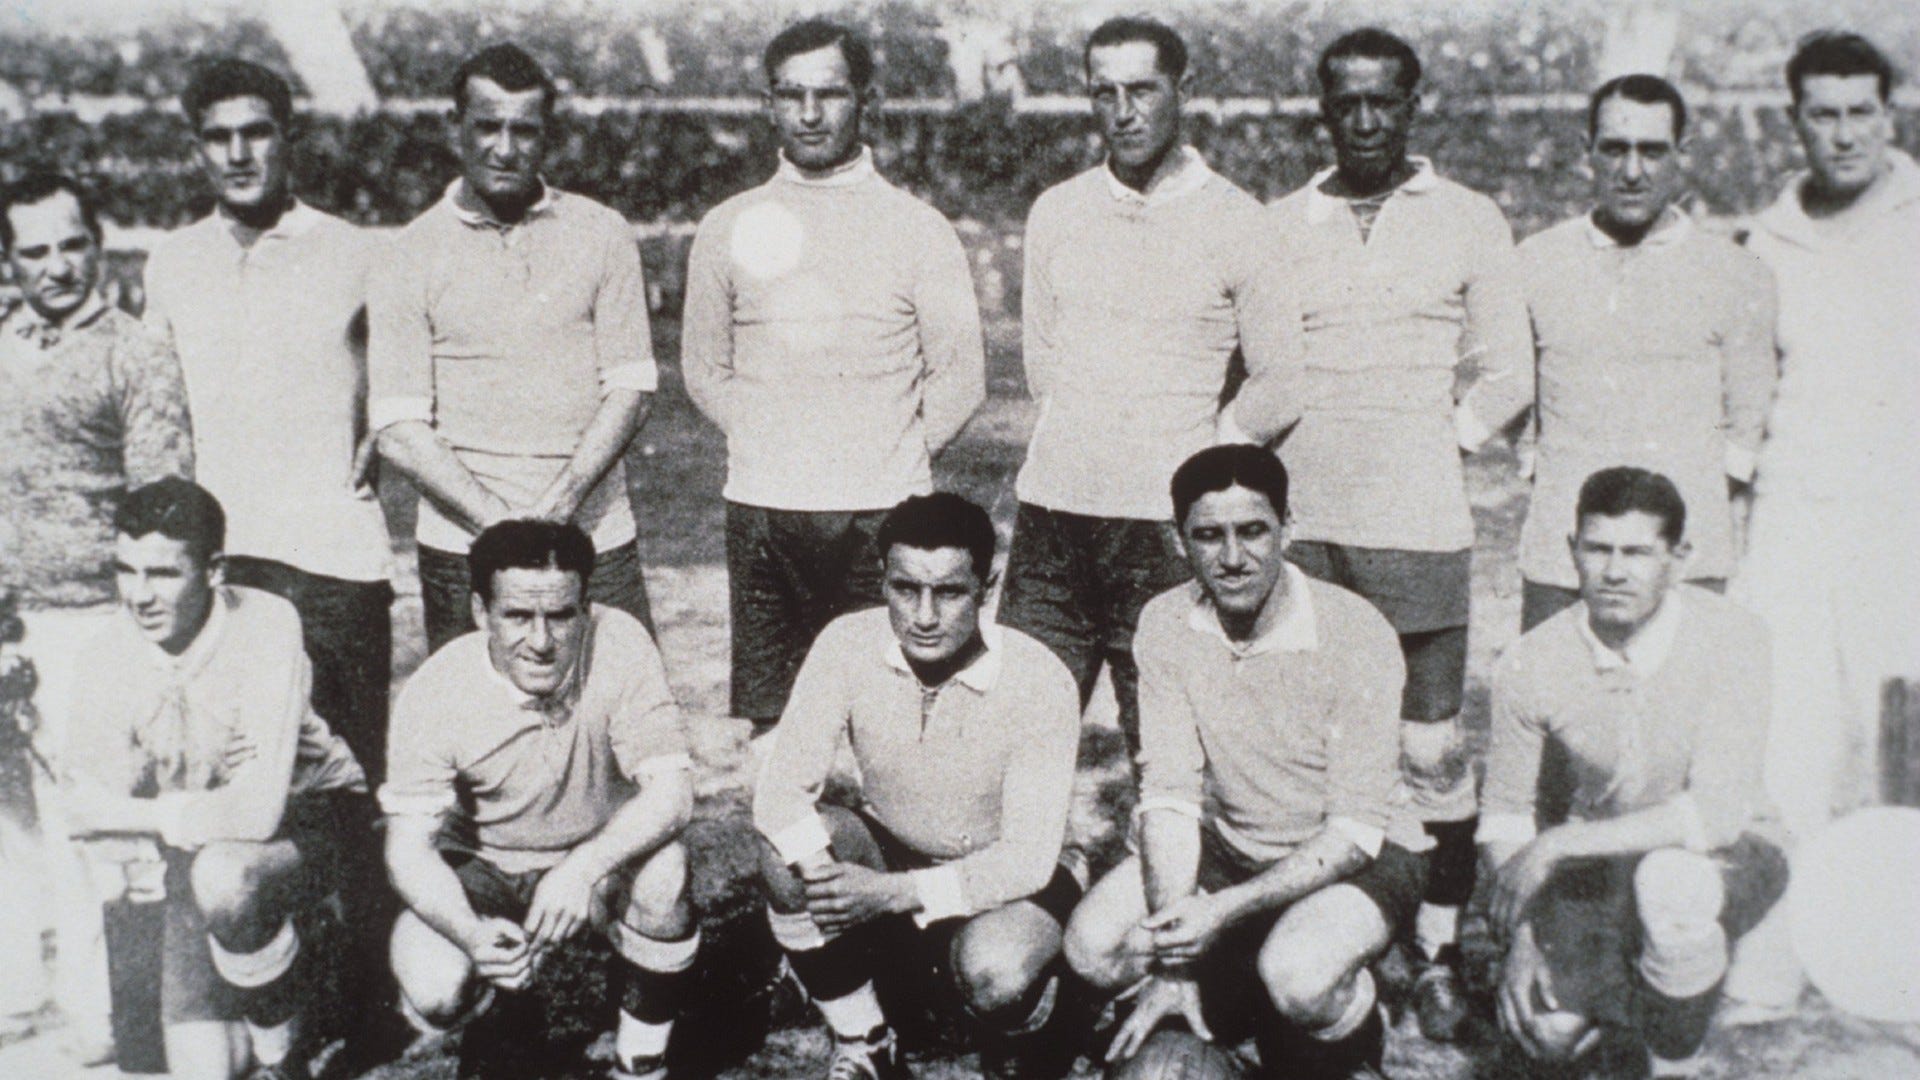 Who won the first-ever FIFA World Cup in 1930? Goal US